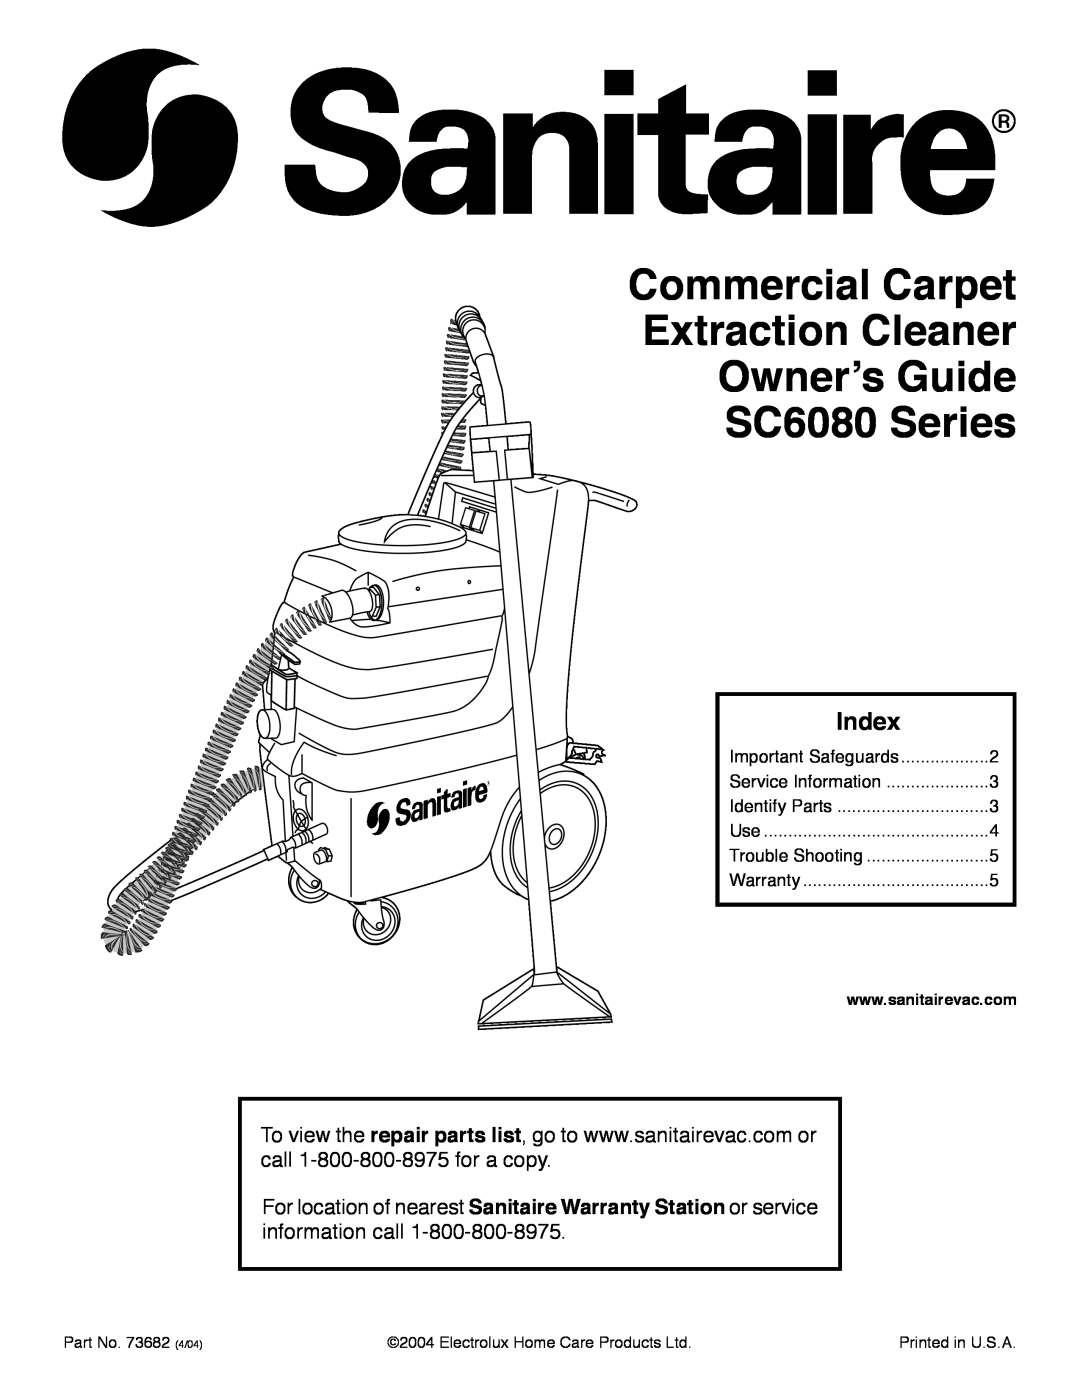 Sanitaire warranty Commercial Carpet Extraction Cleaner Ownerʼs Guide SC6080 Series, Index 